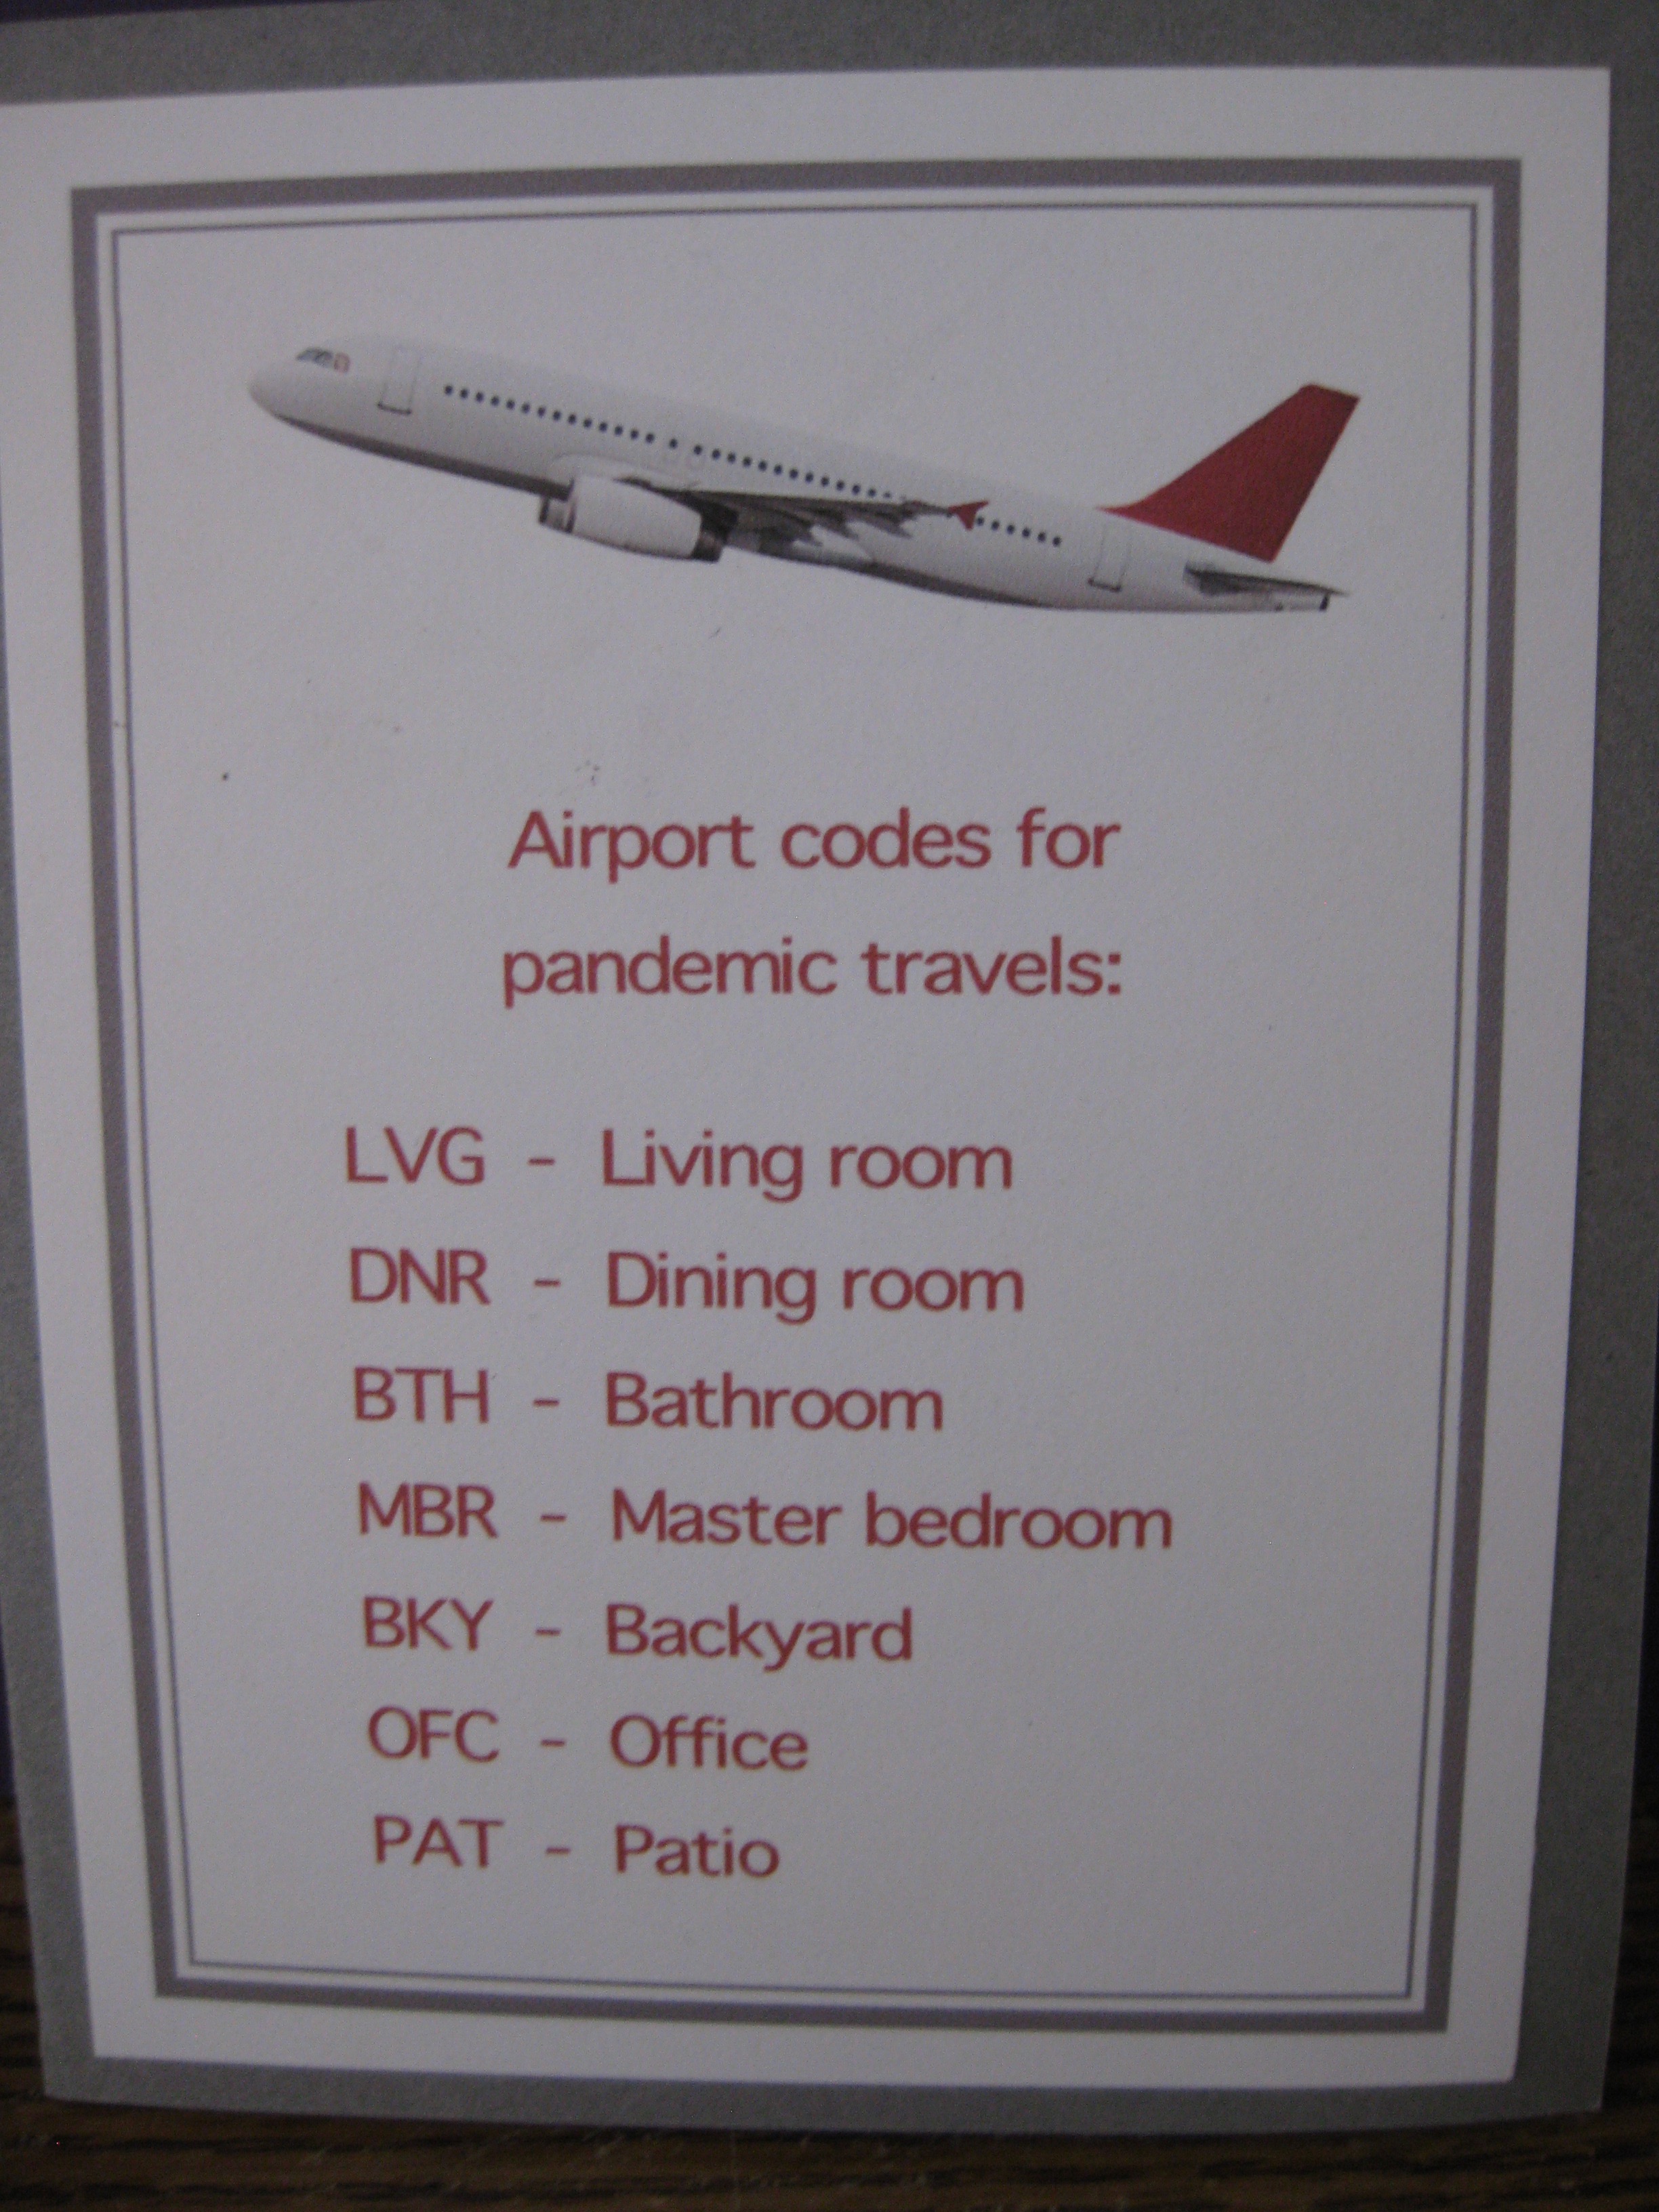 Airport codes